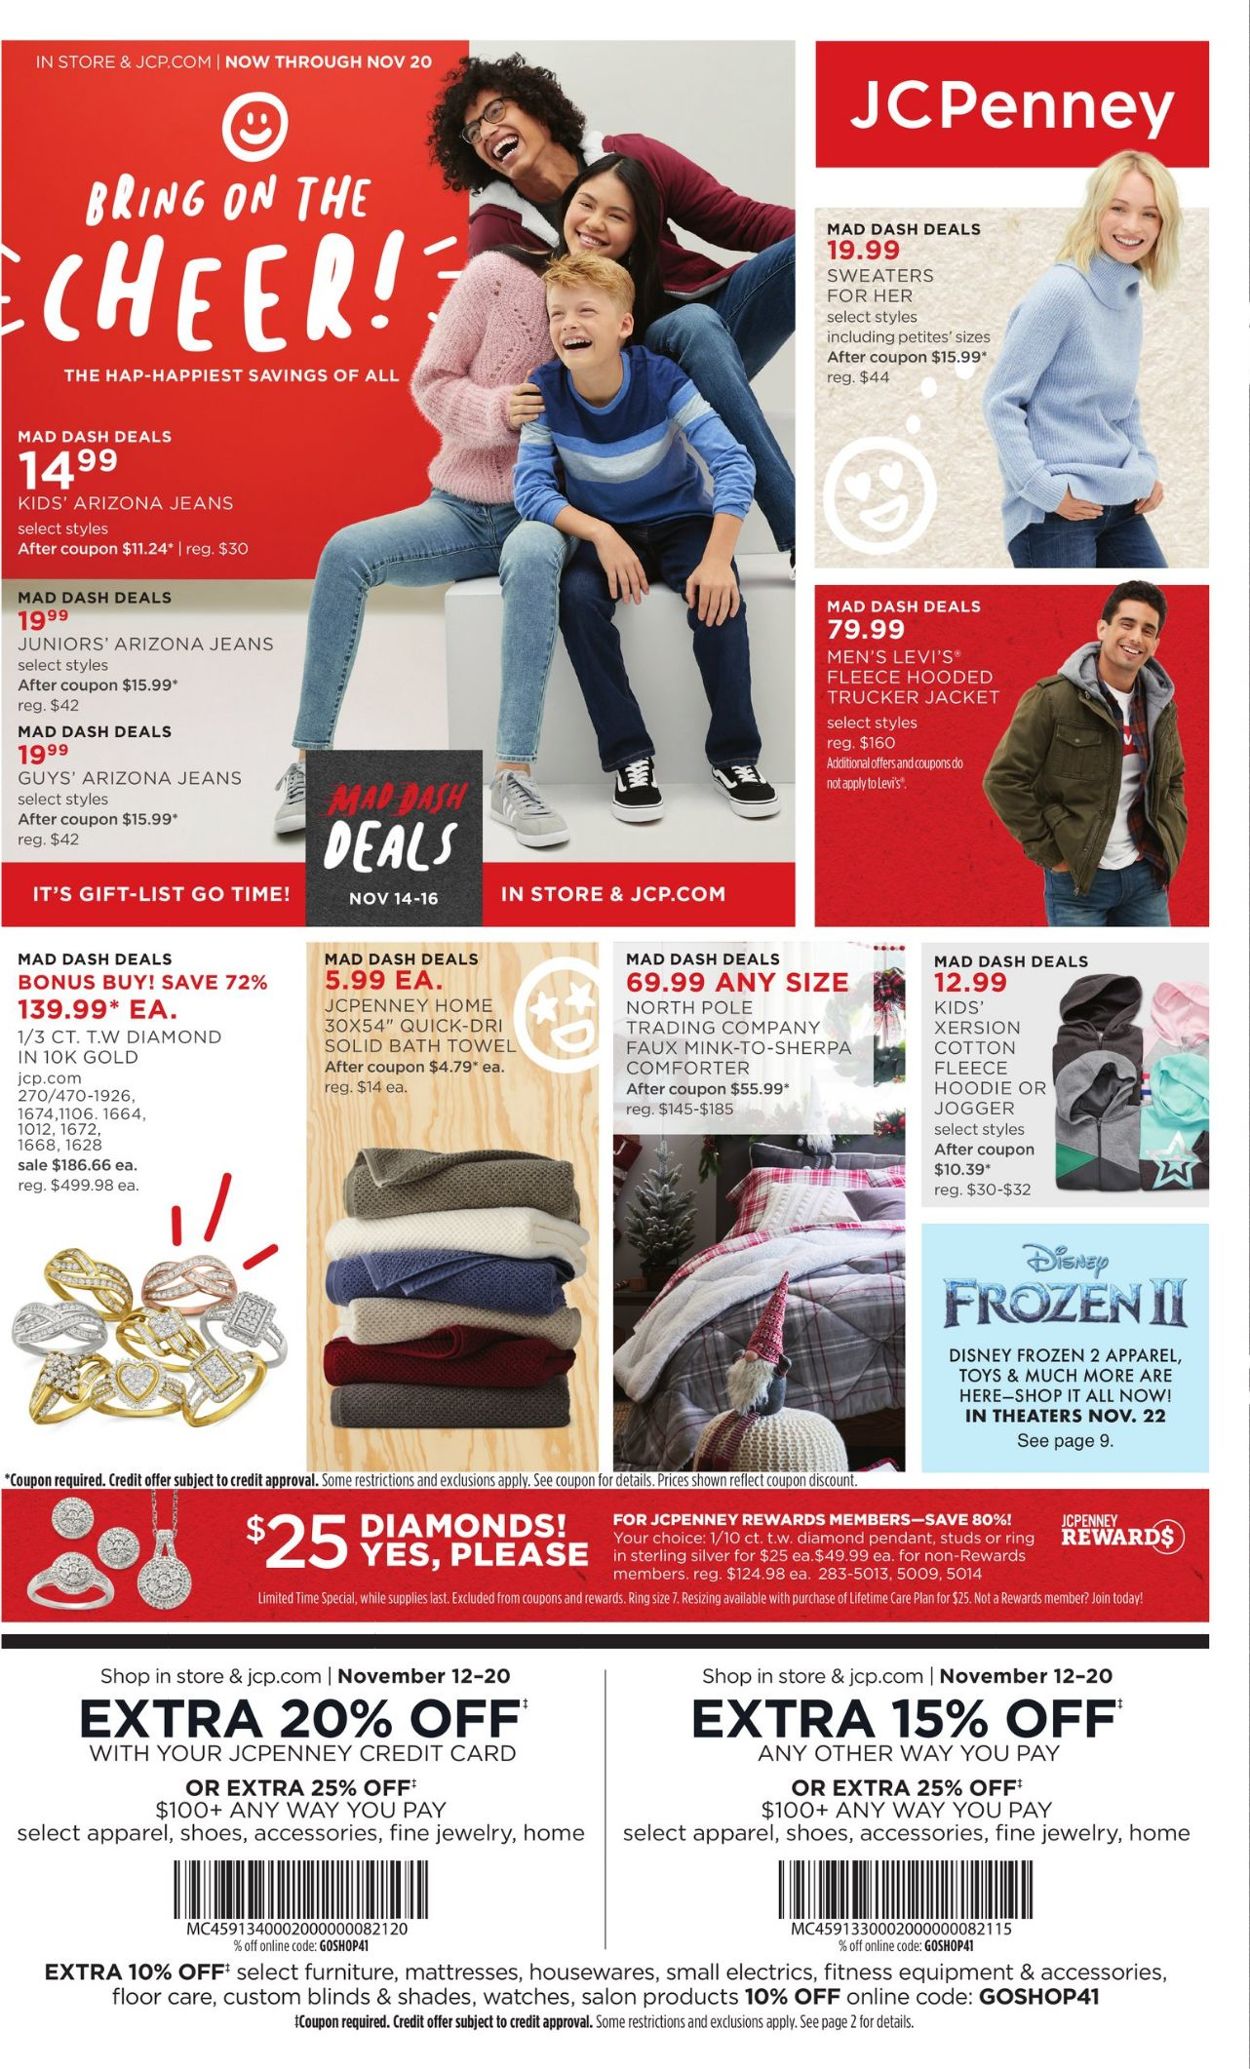 jcpenney-black-friday-ad-2019-current-weekly-ad-11-12-11-16-2019